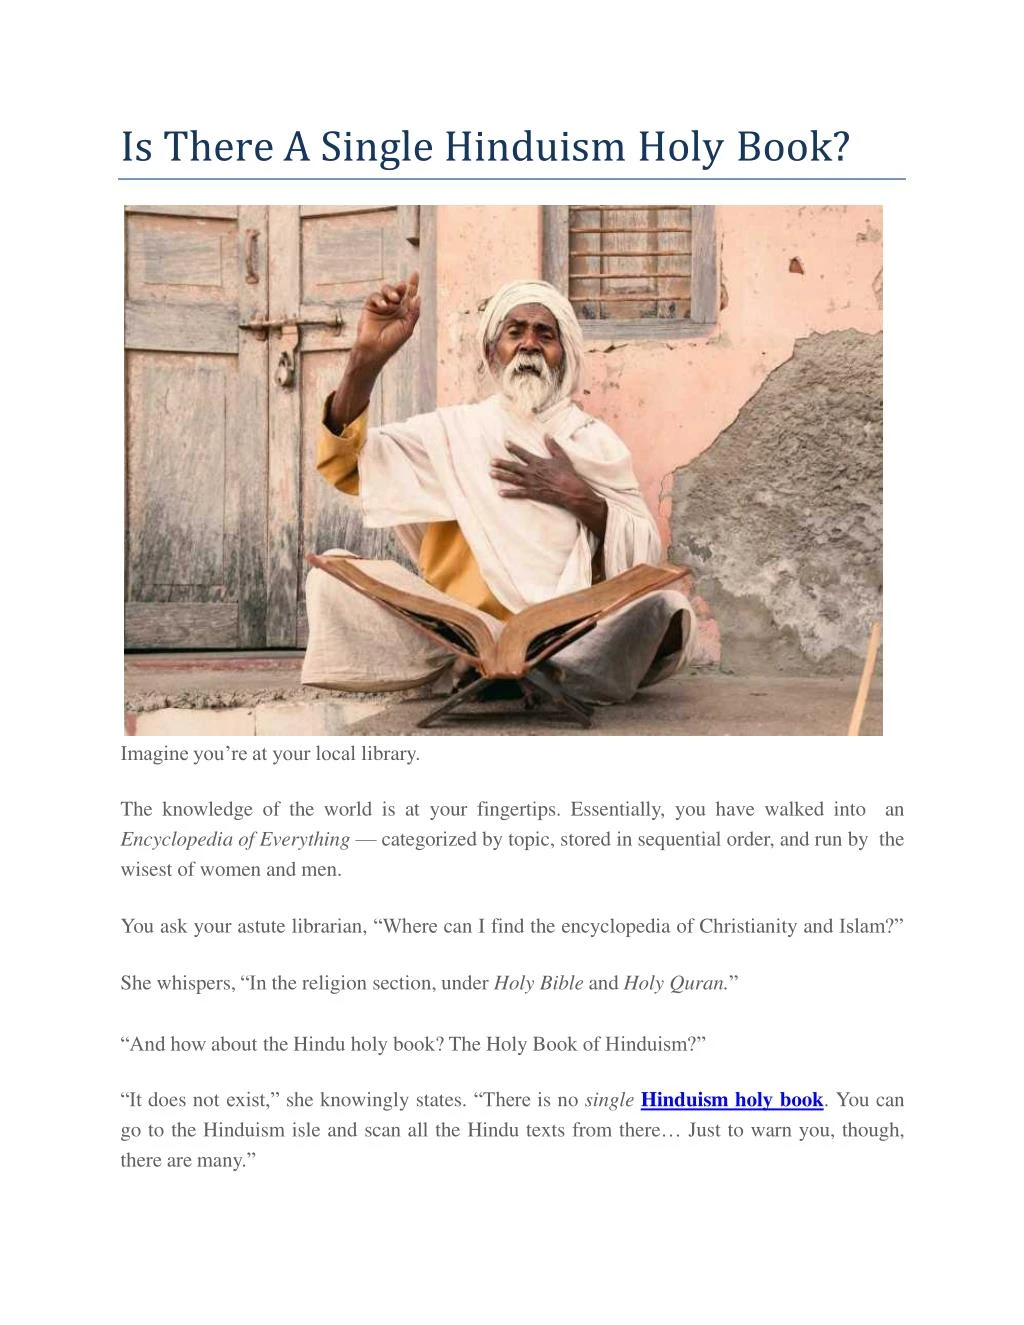 is there a single hinduism holy book